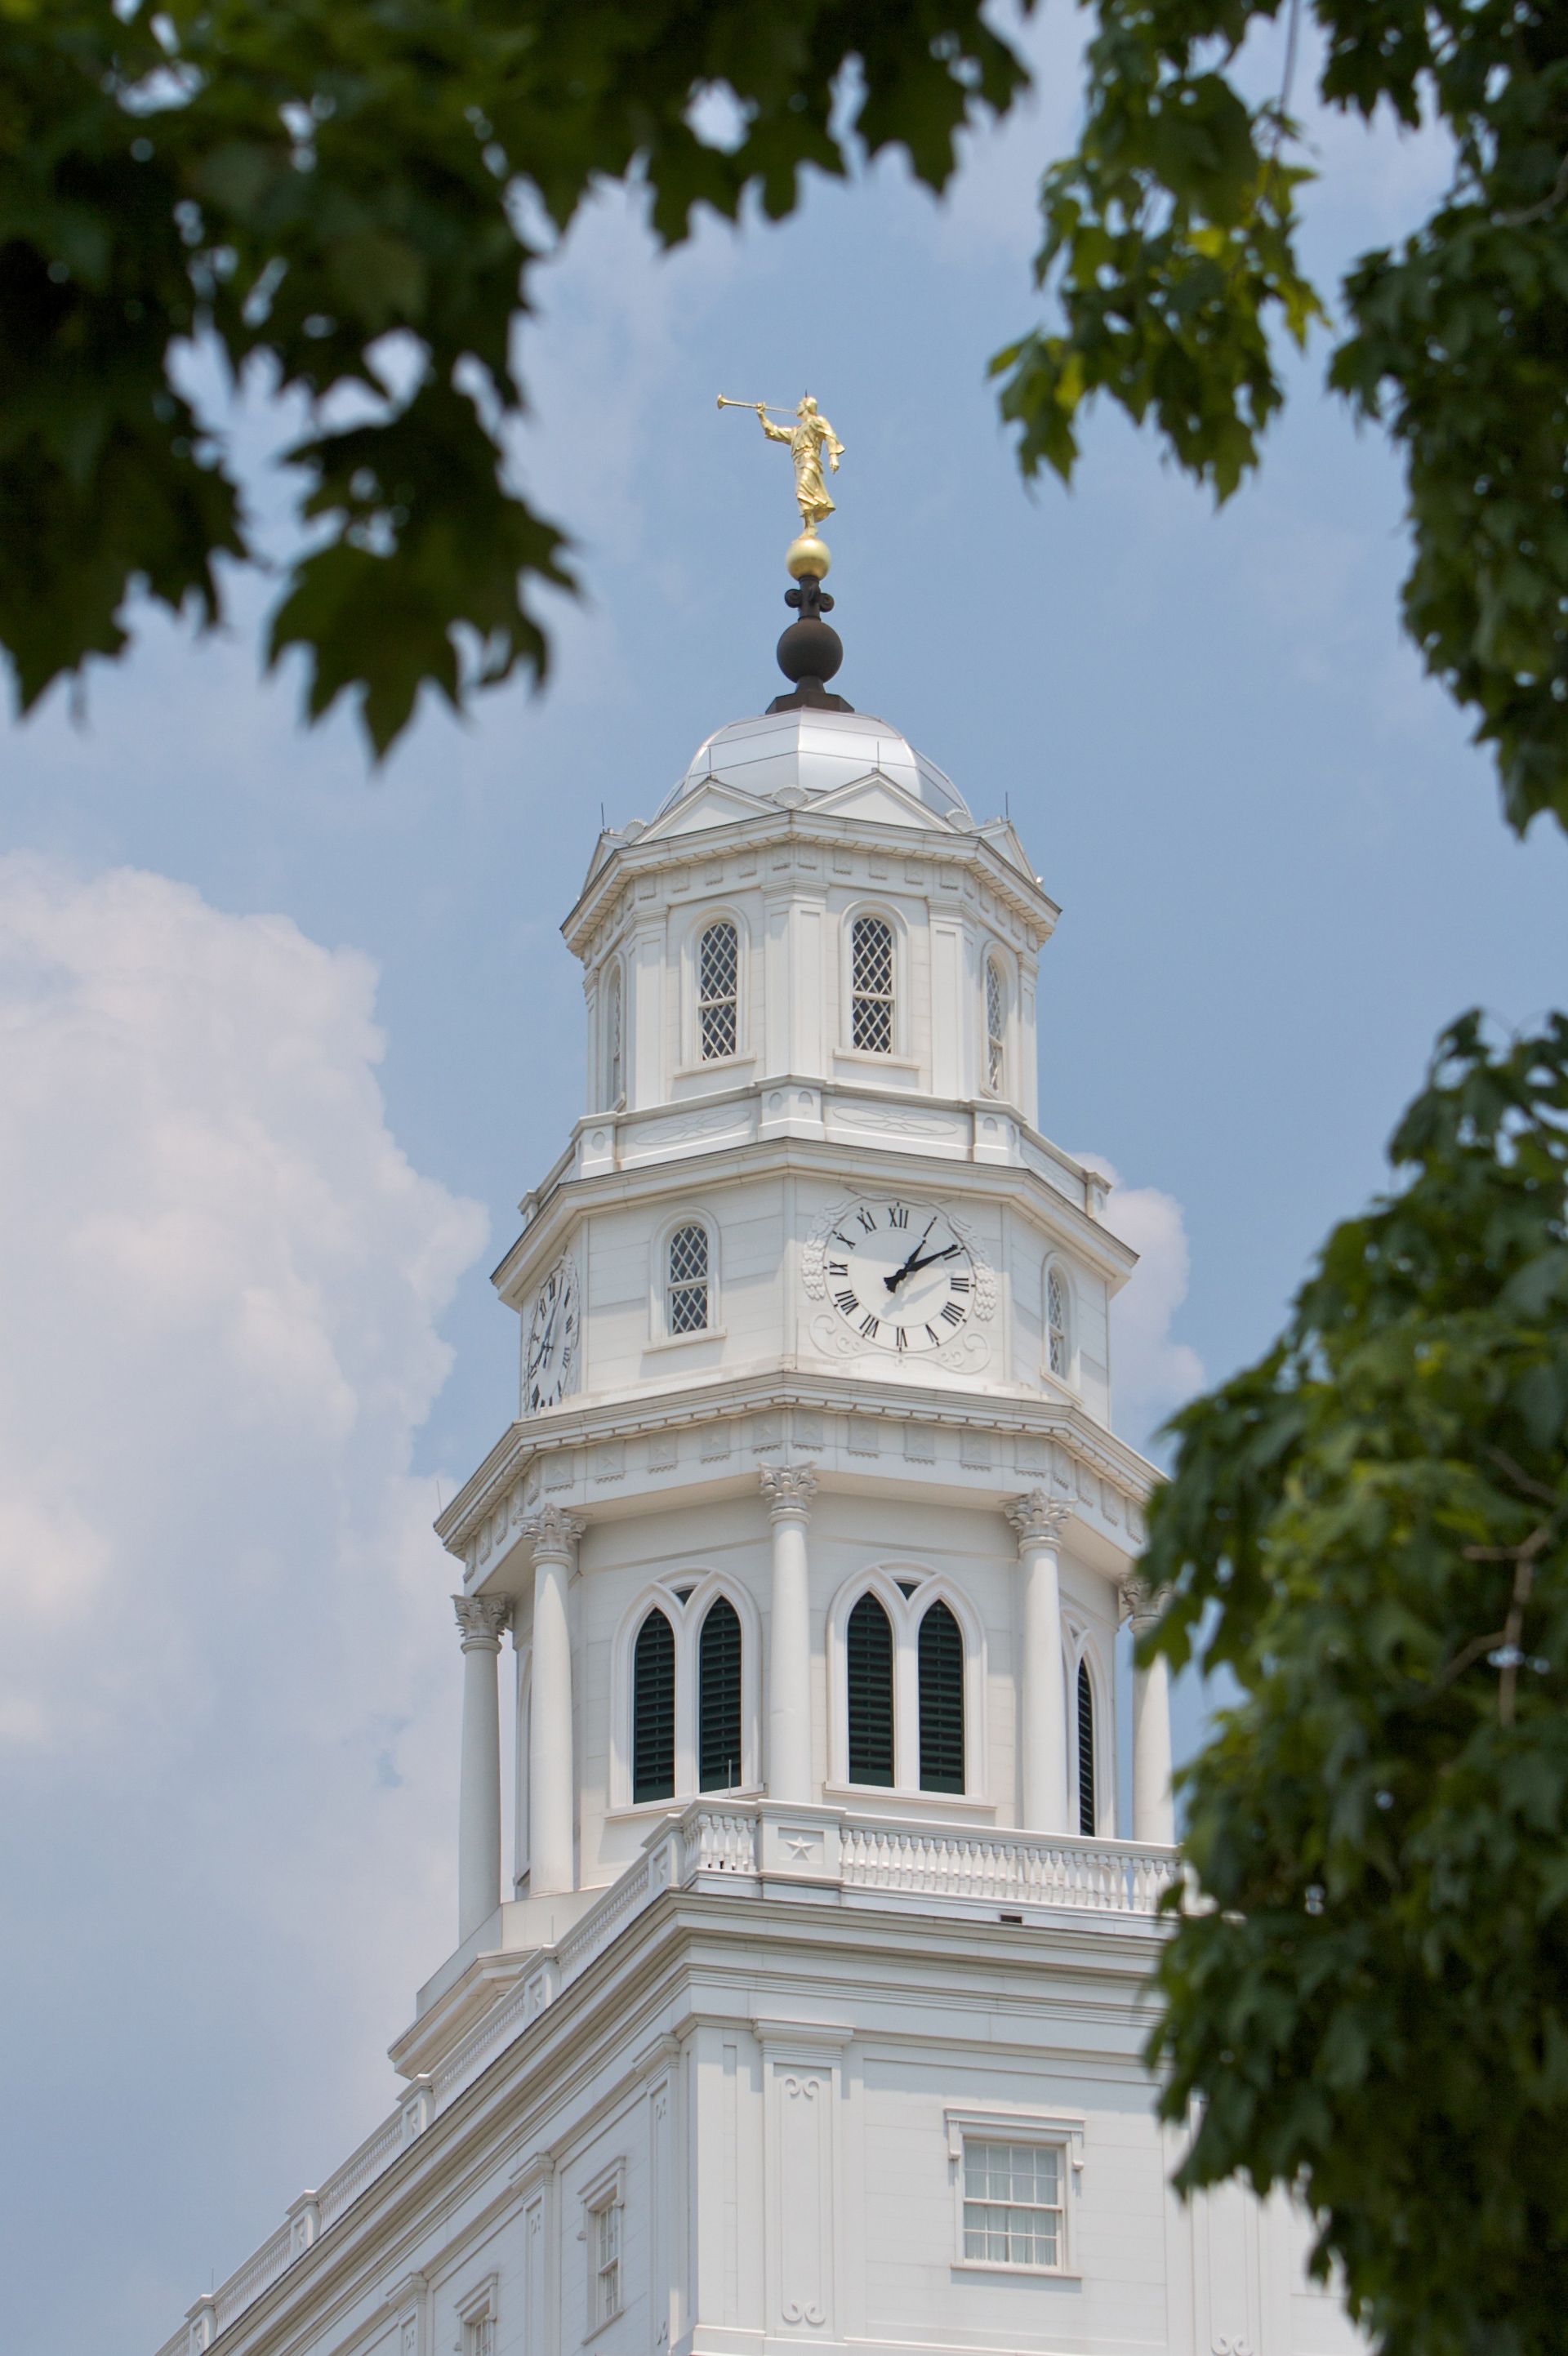 The Nauvoo Illinois Temple spire, including windows and the exterior of the temple.